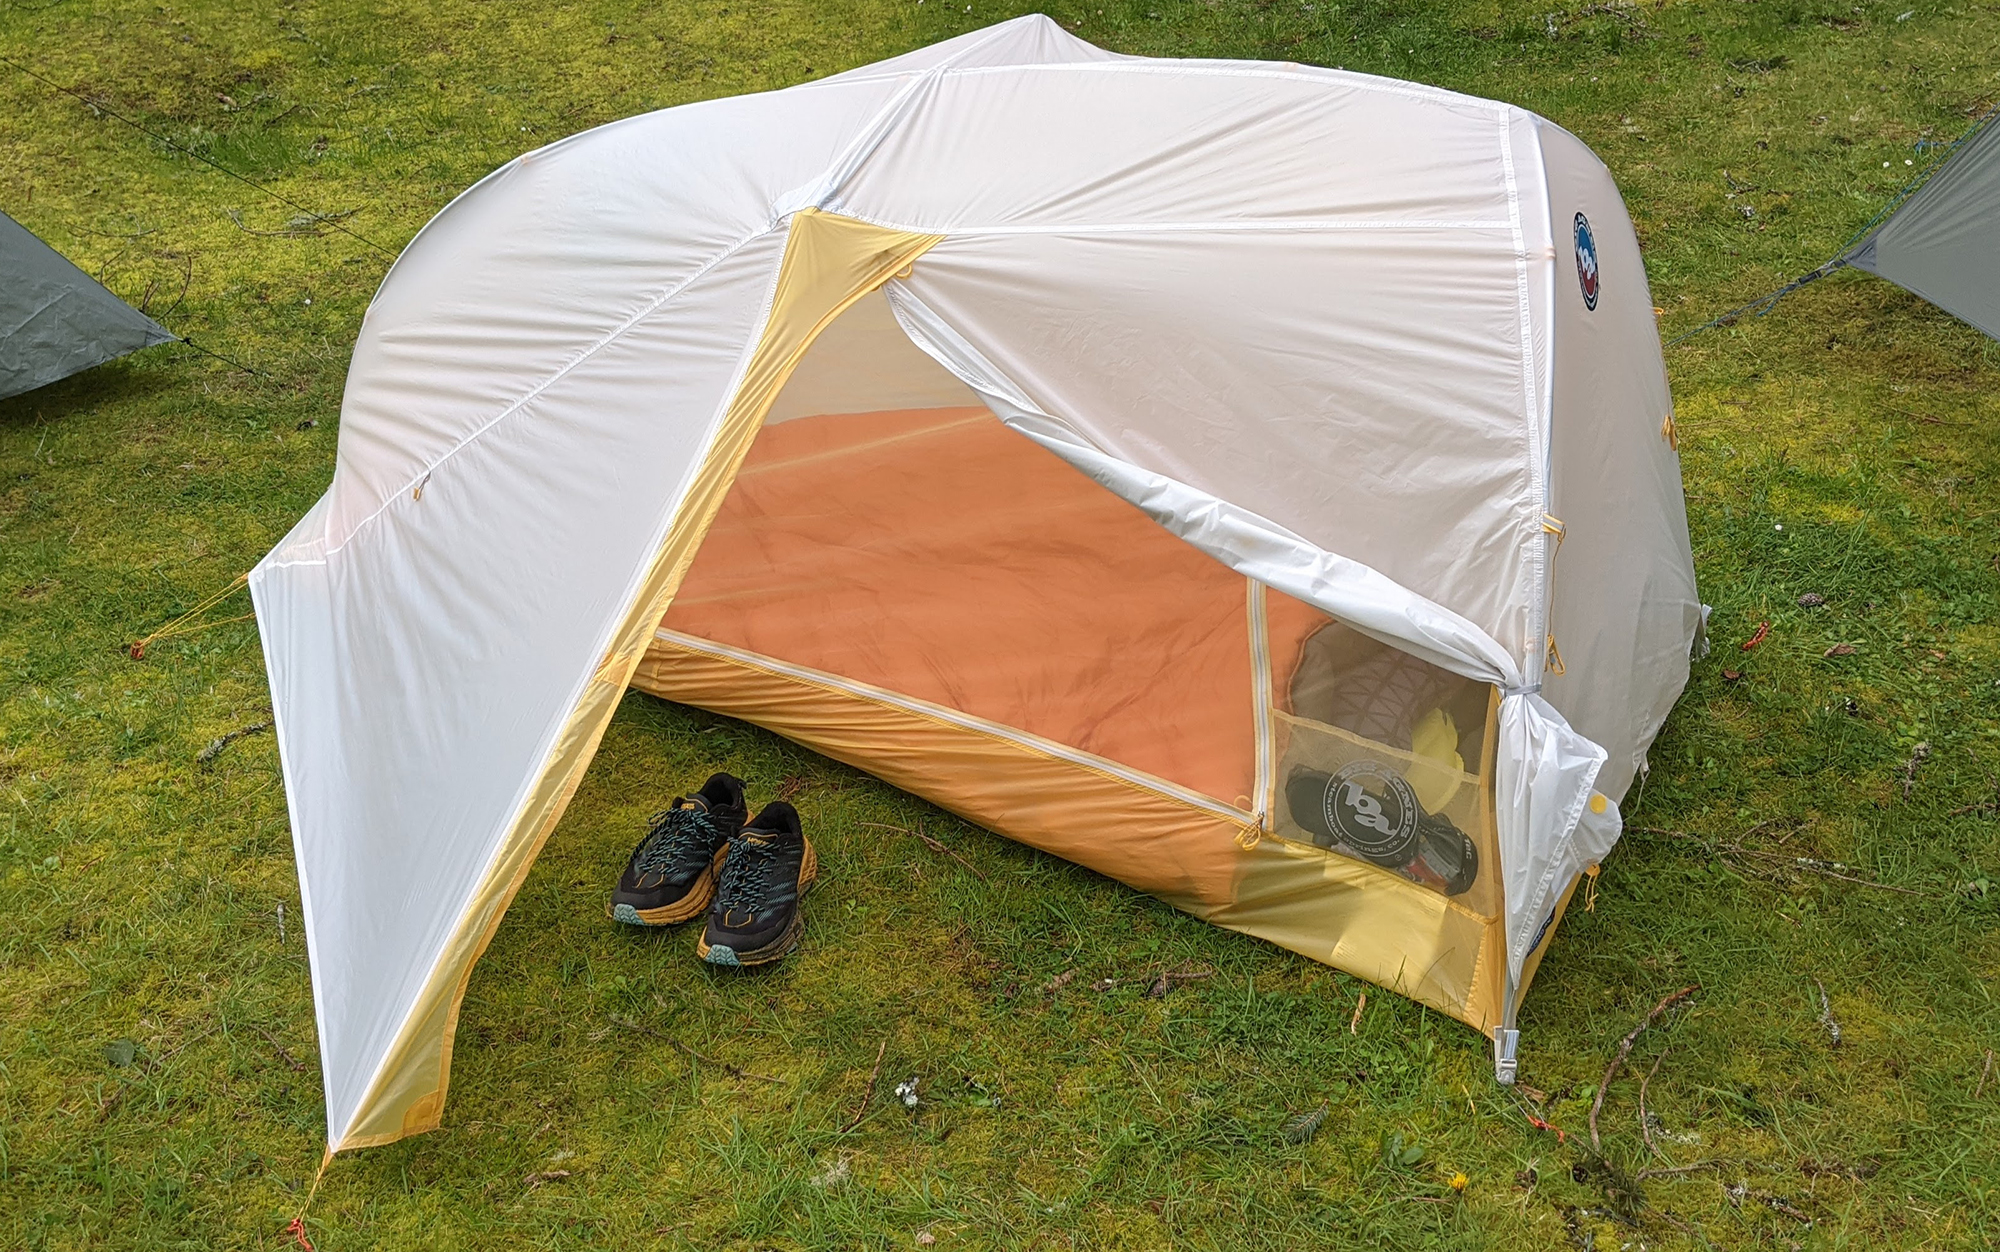 We loved the Big Agnes Tiger Wall UL, even if itâs no longer the lightest of the freestanding options. 